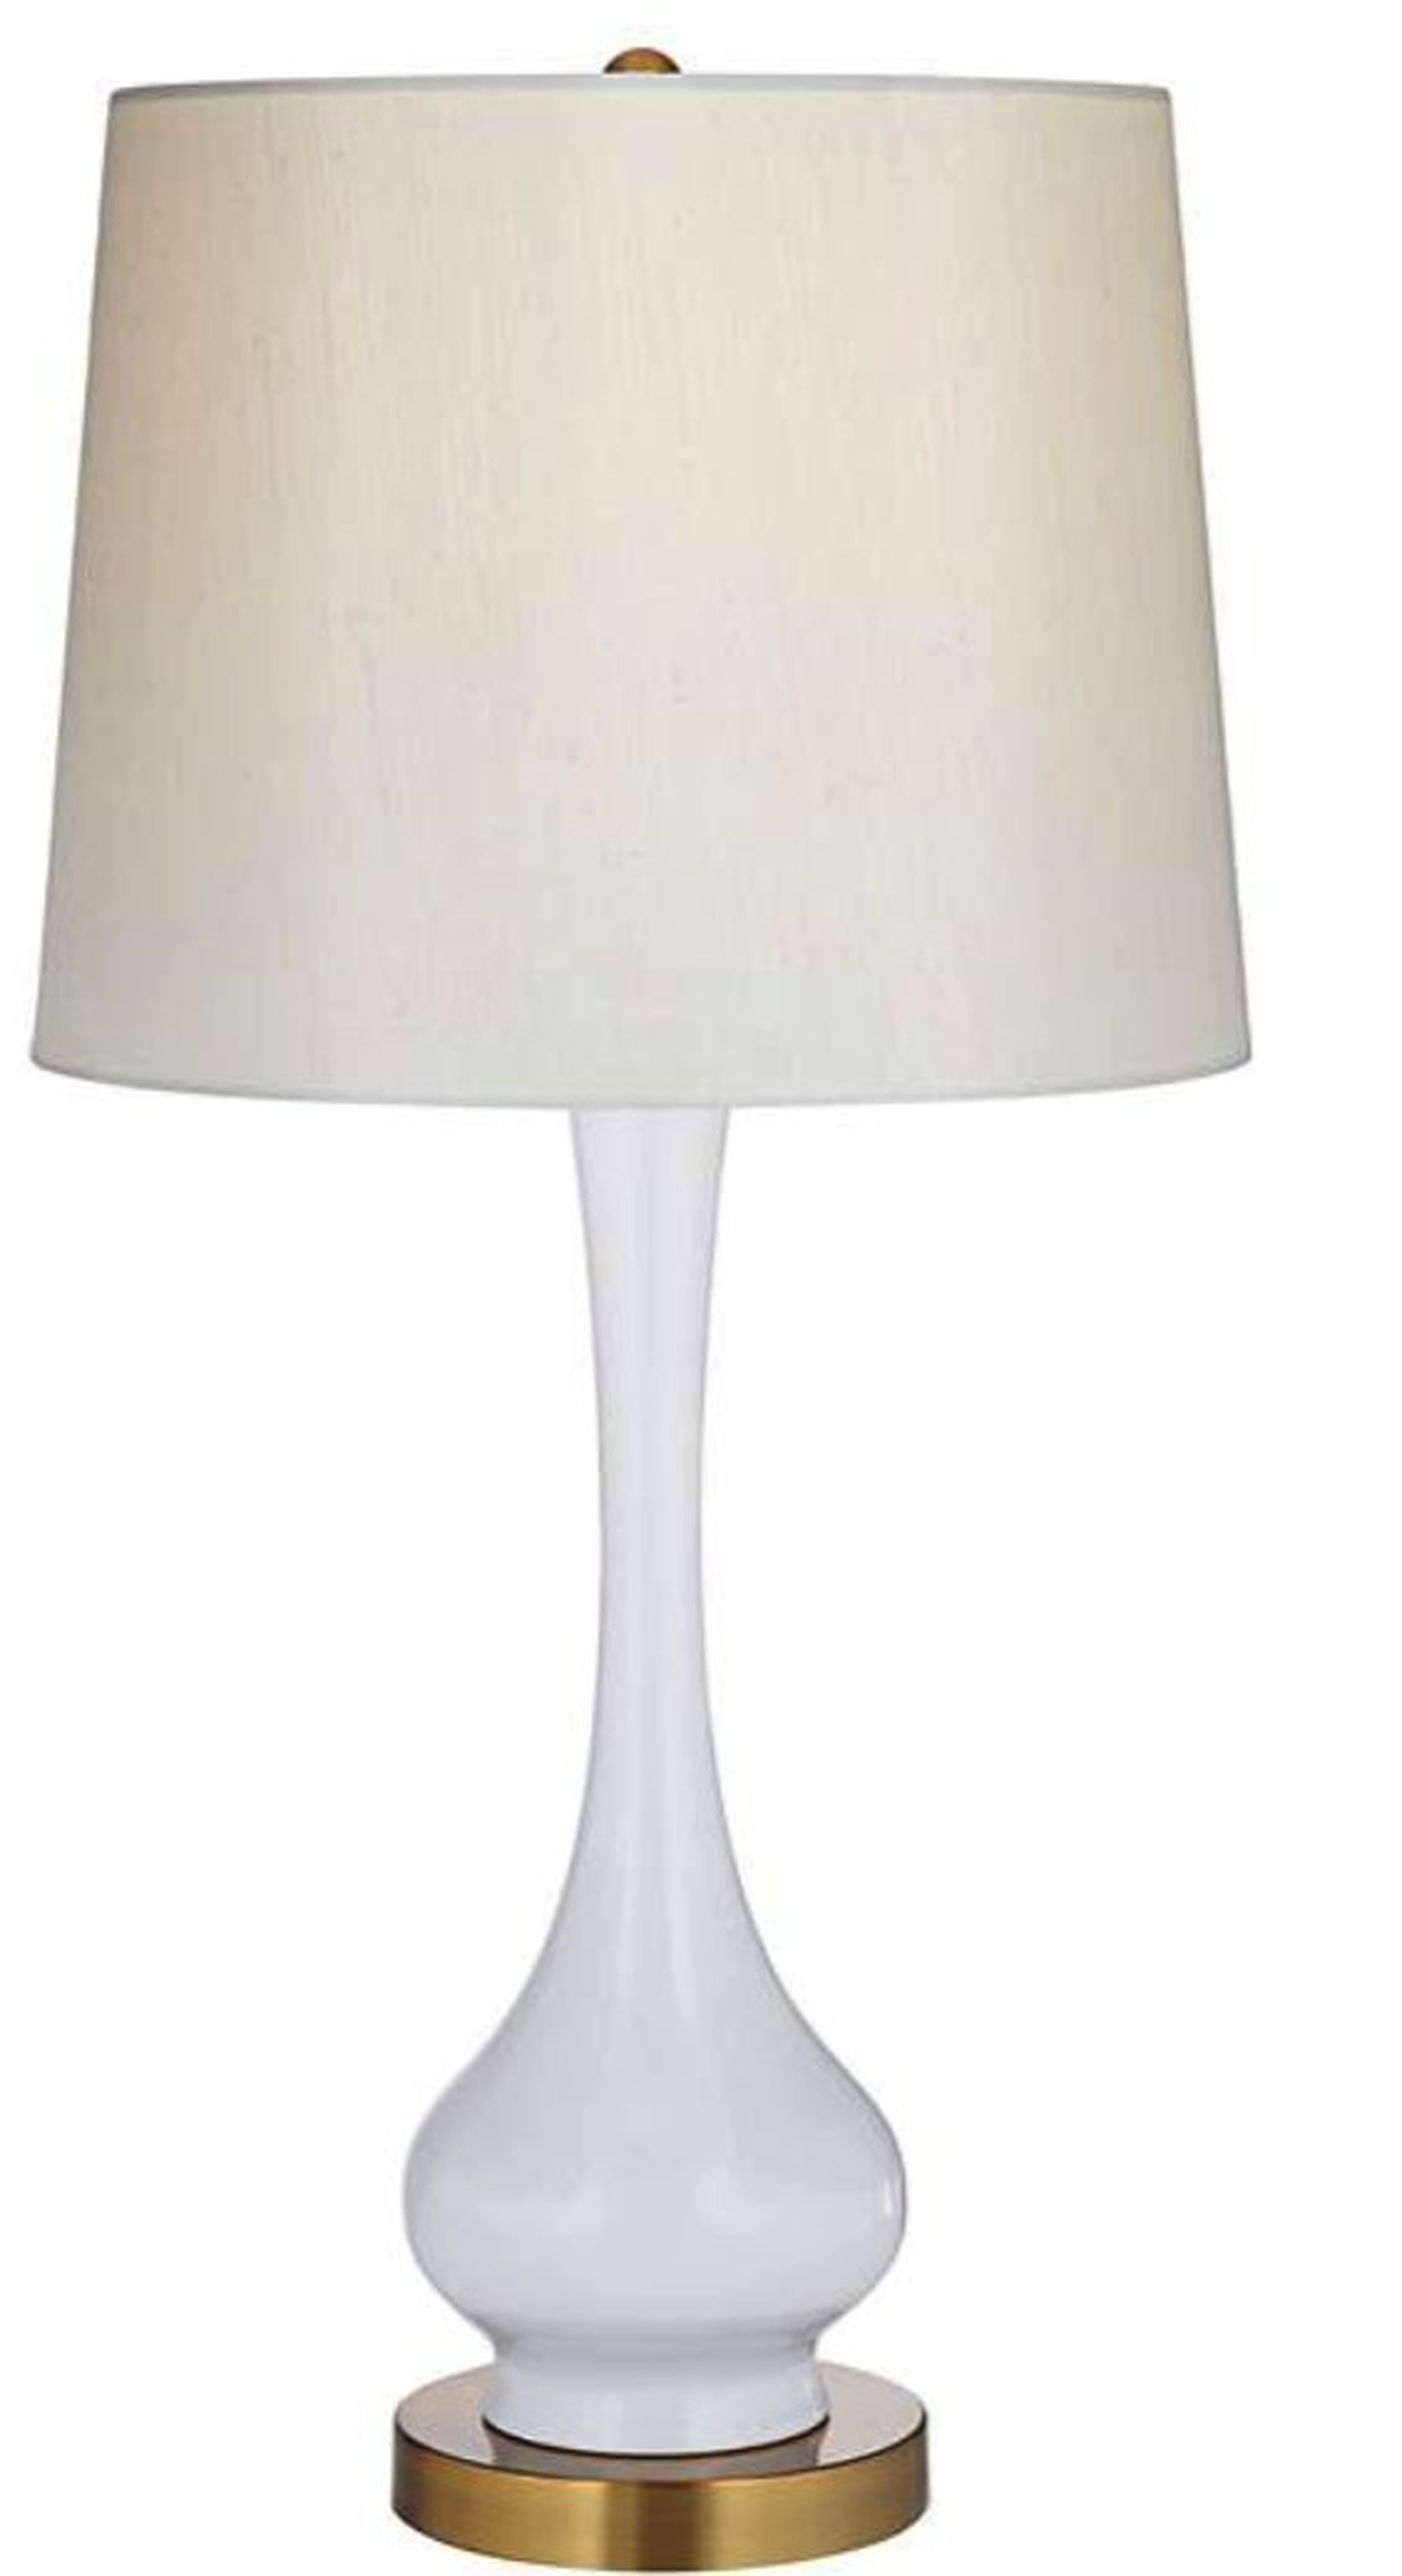 Lula White and Brass Gourd Table Lamp - Lamps Plus